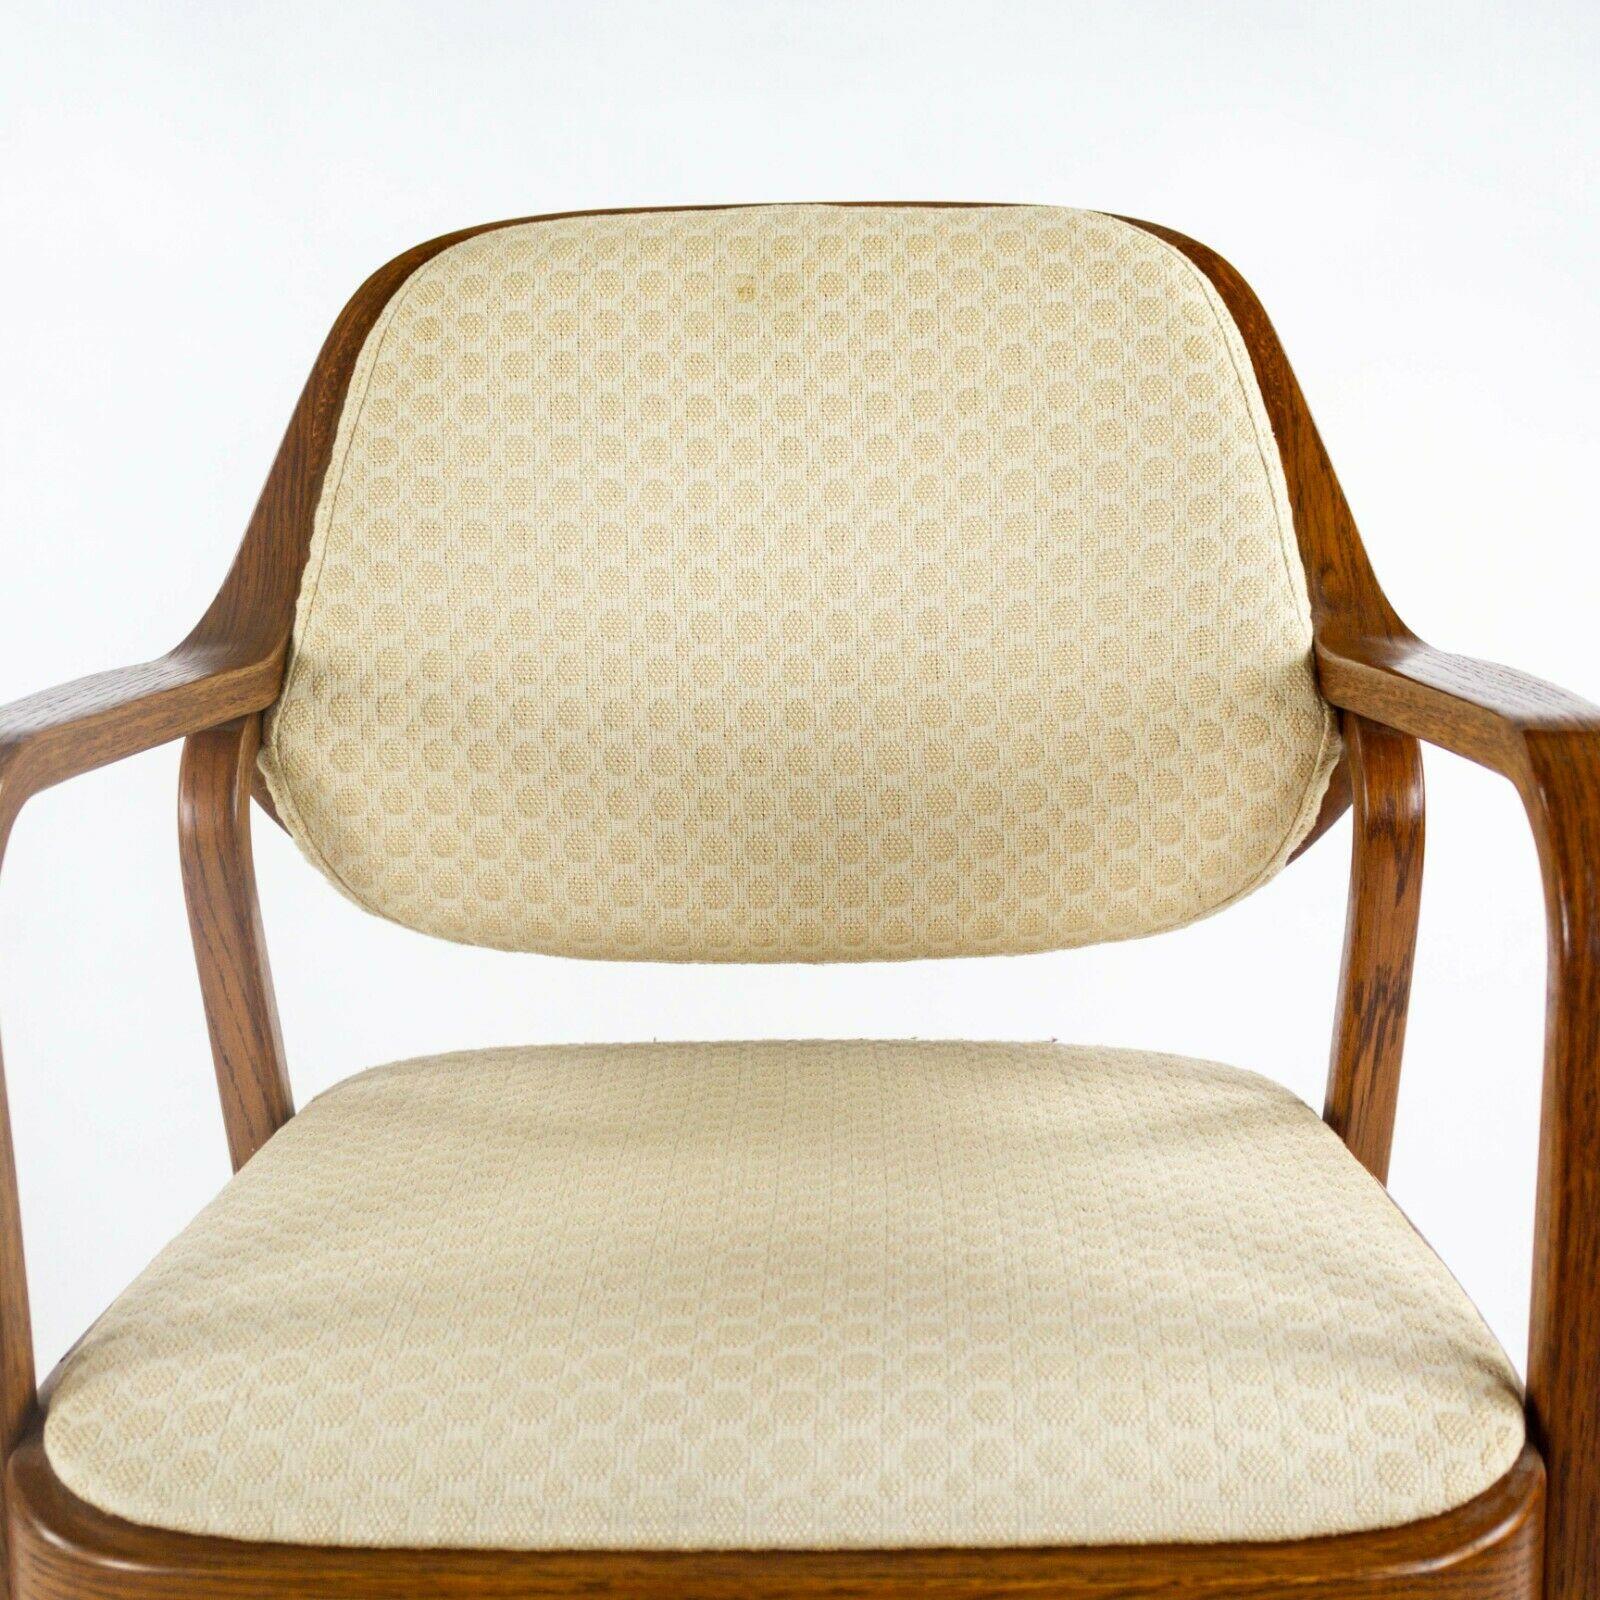 1980s Pair of Don Petitt for Knoll 1105 Bentwood Armchair in Oak with Tan Fabric For Sale 6